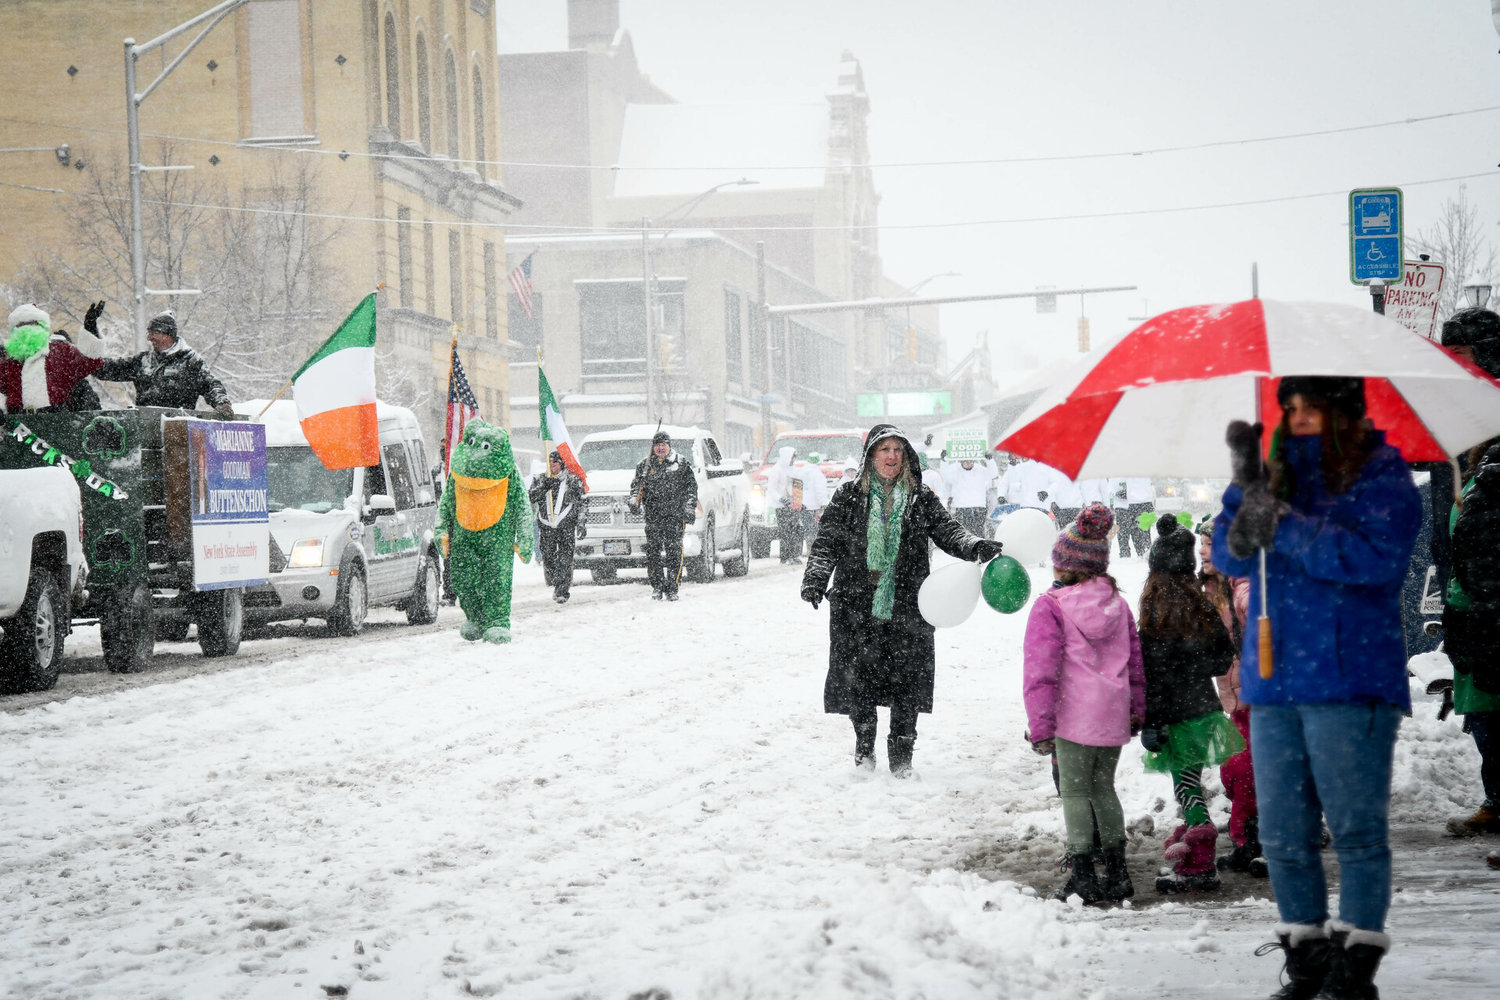 A snowy parade celebrated St. Patrick’s Day in March 2022 in Utica. The Utica St. Patrick’s Day Parade returns at 10 a.m. March 11, starting at Oneida Square.